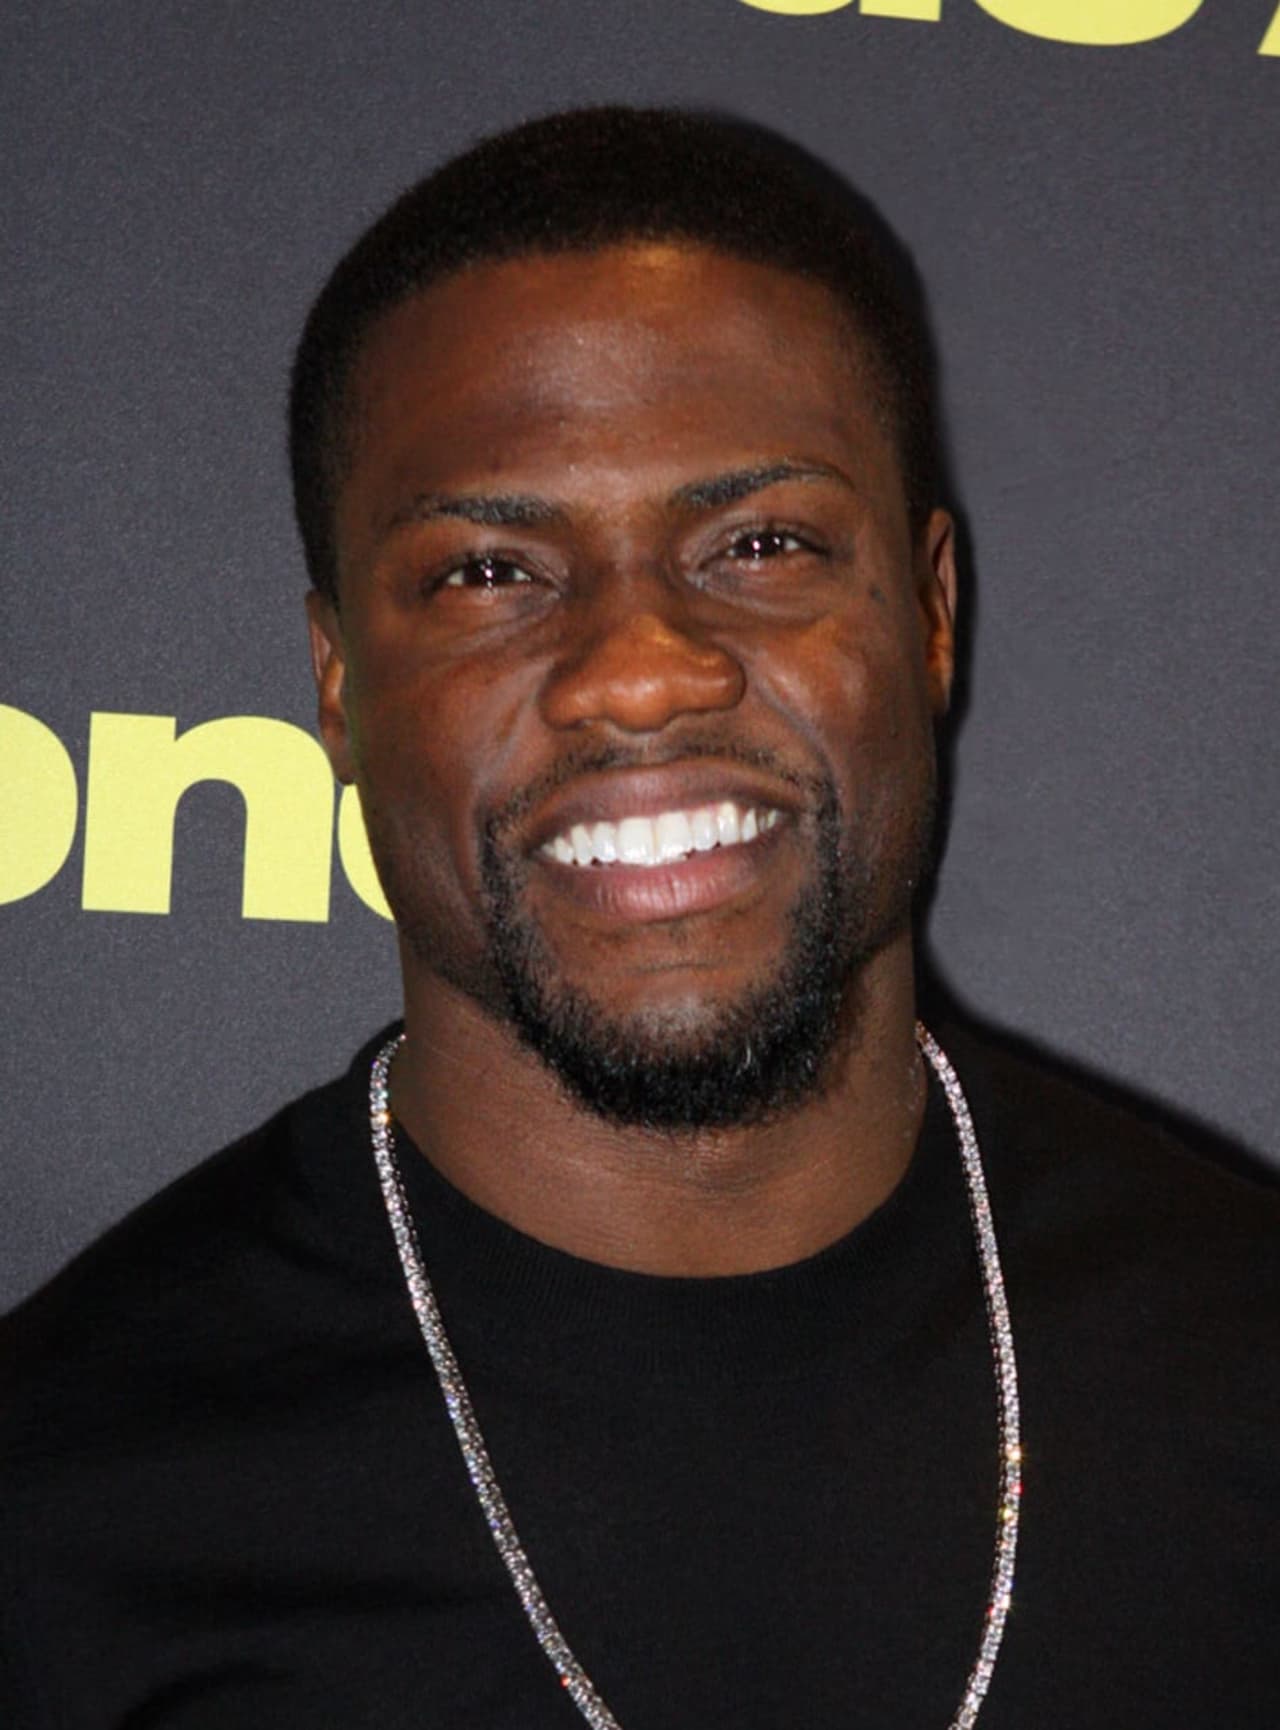 Funnyman Kevin Hart is coming to Bridgeport.